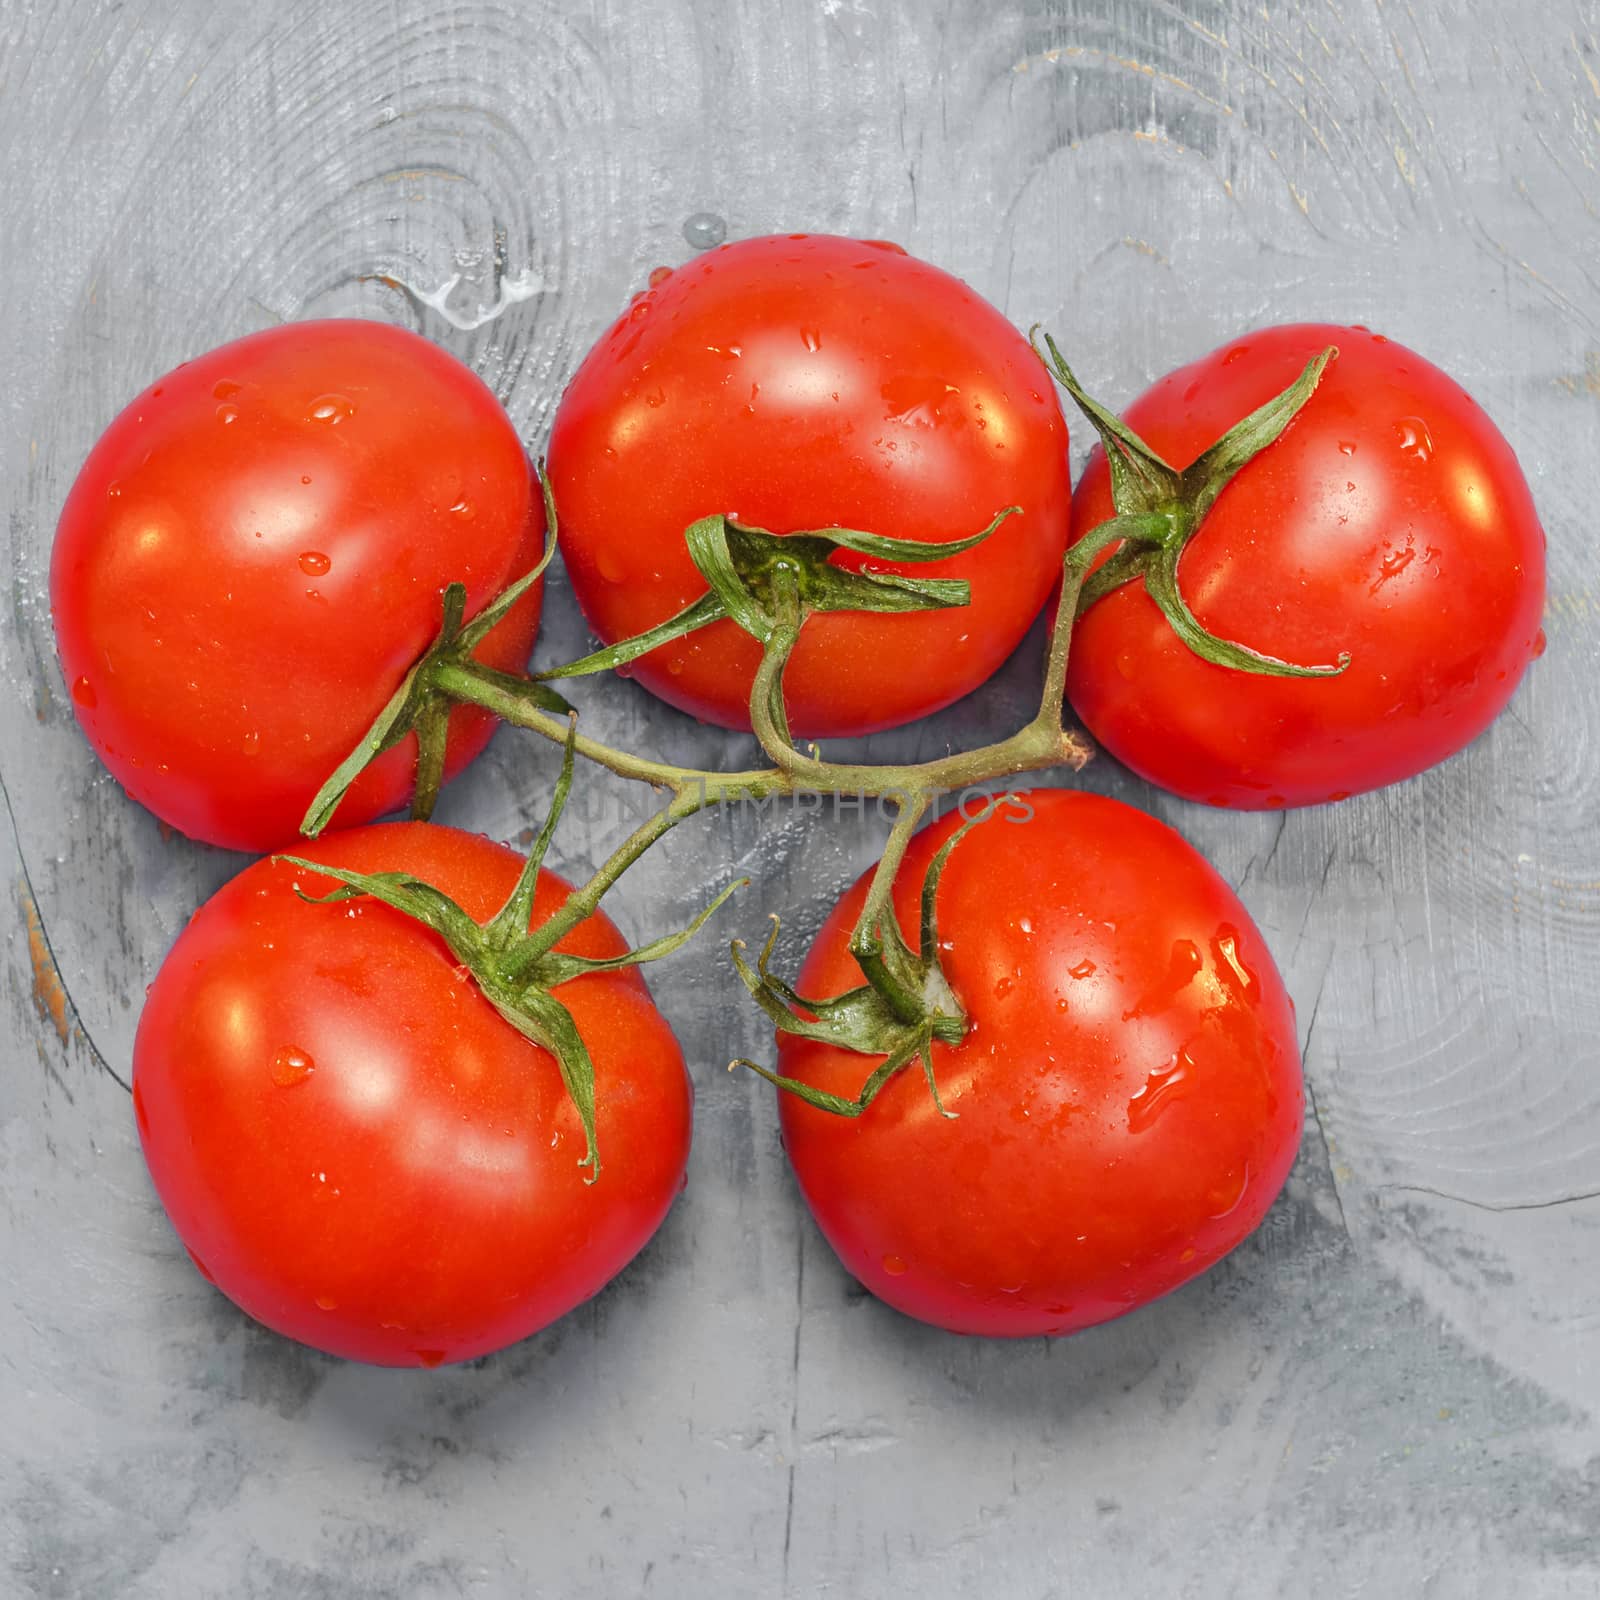 Fresh red tomatoes on a branch, gray wood background. The view from the top.